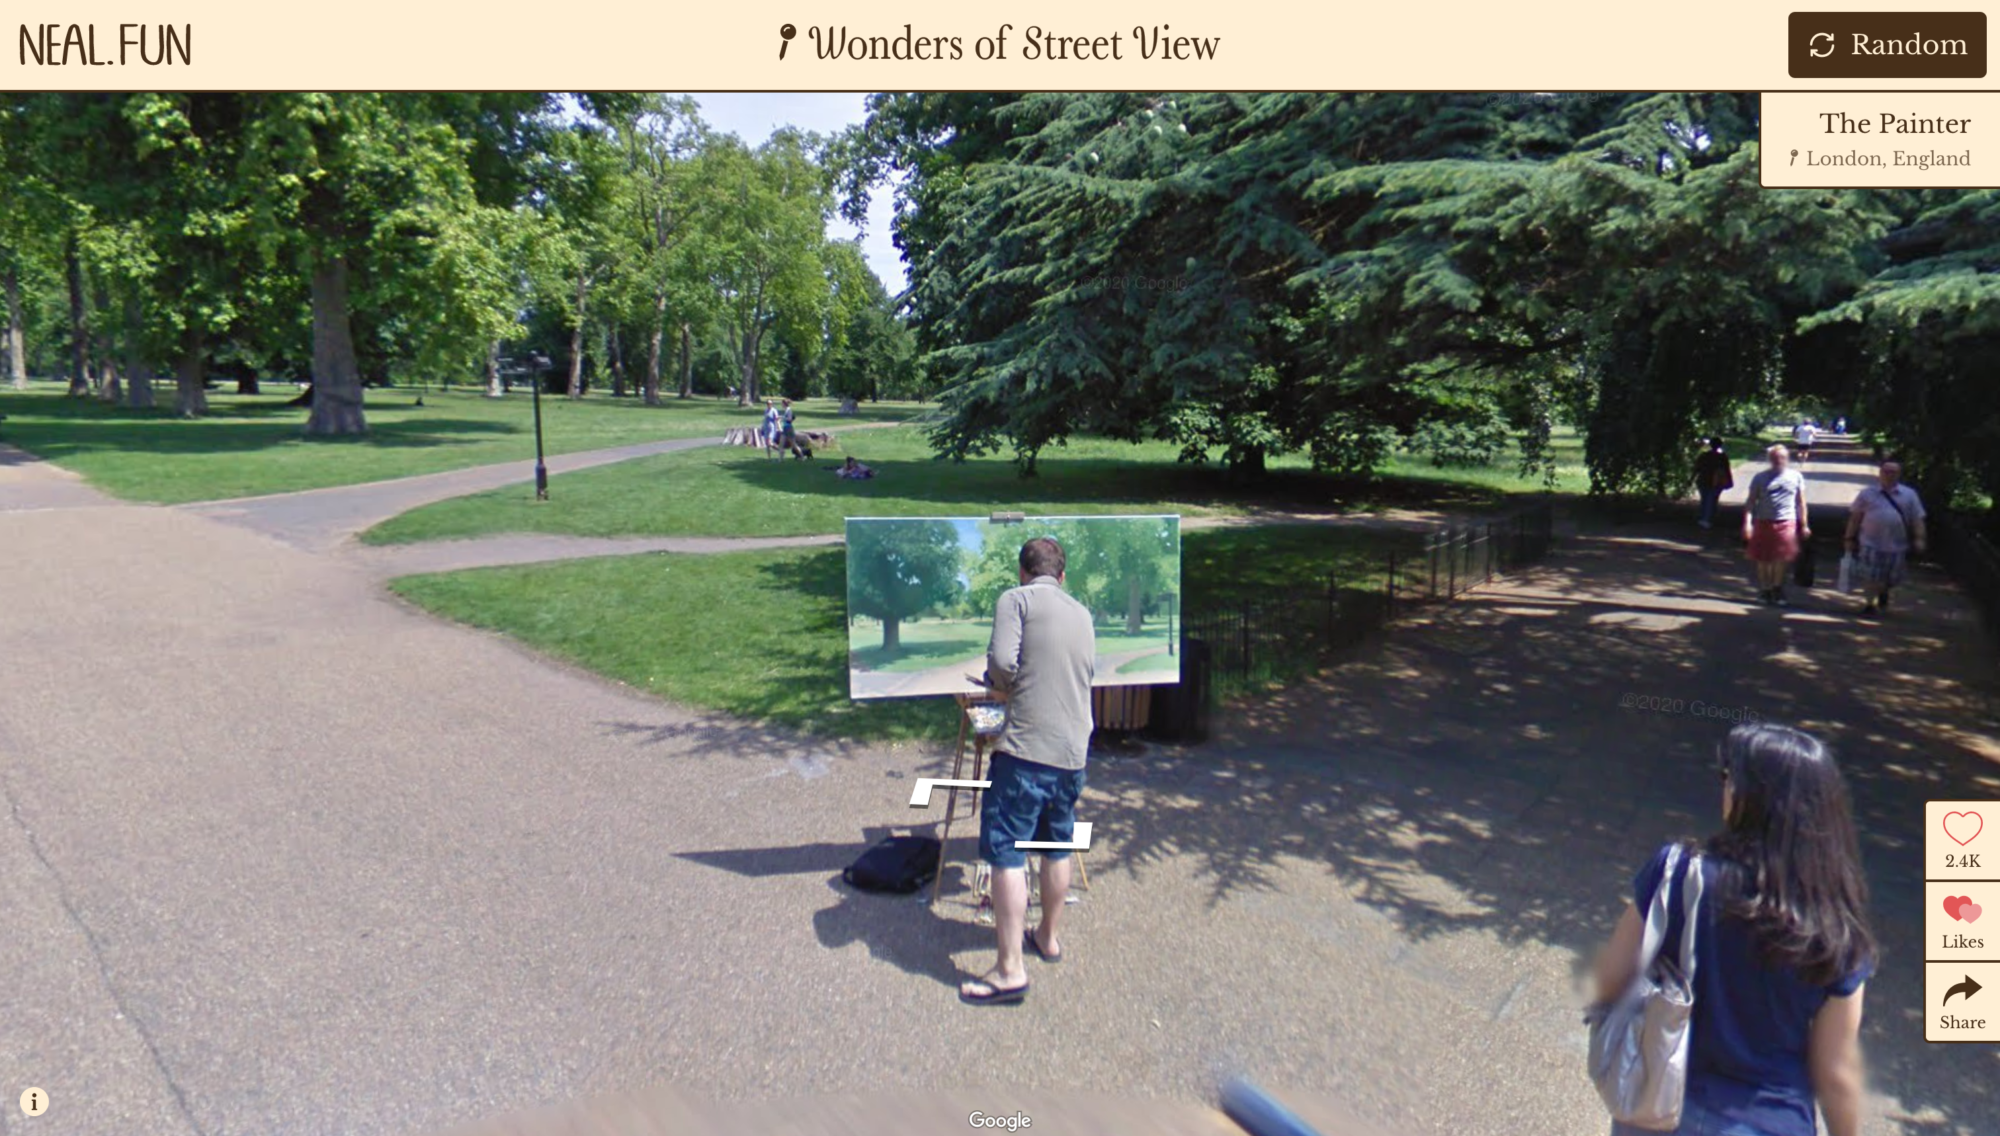 A screenshot of the website Wonders of Street View which shows a man in a park in London painting the park.